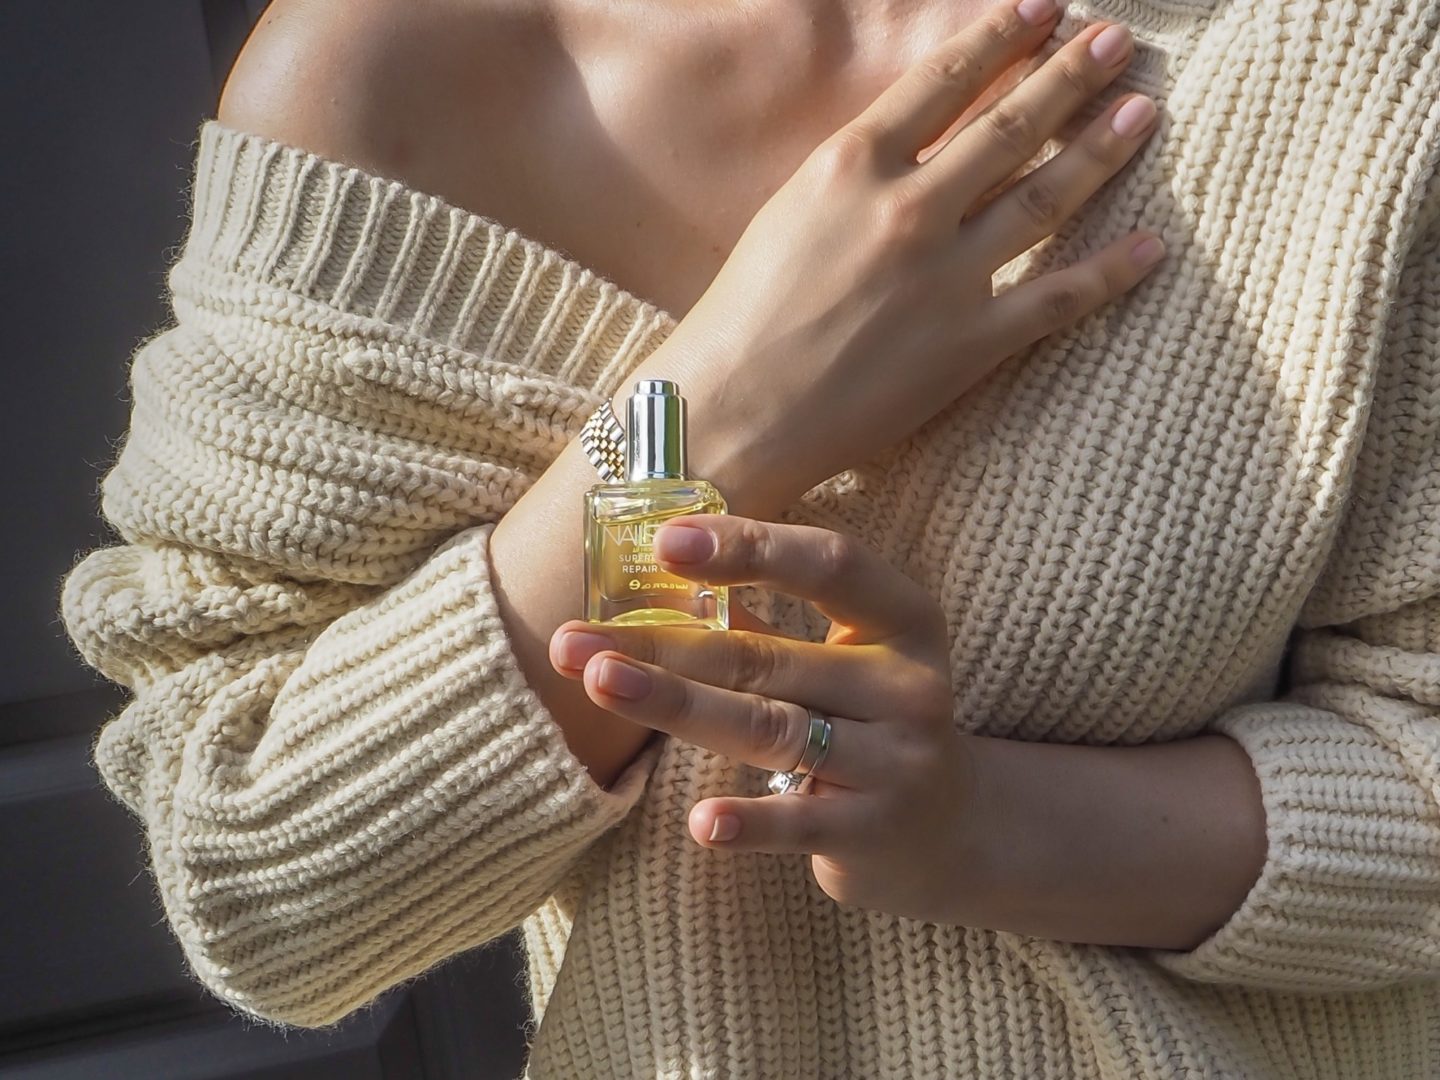 How to strengthen your nails naturally